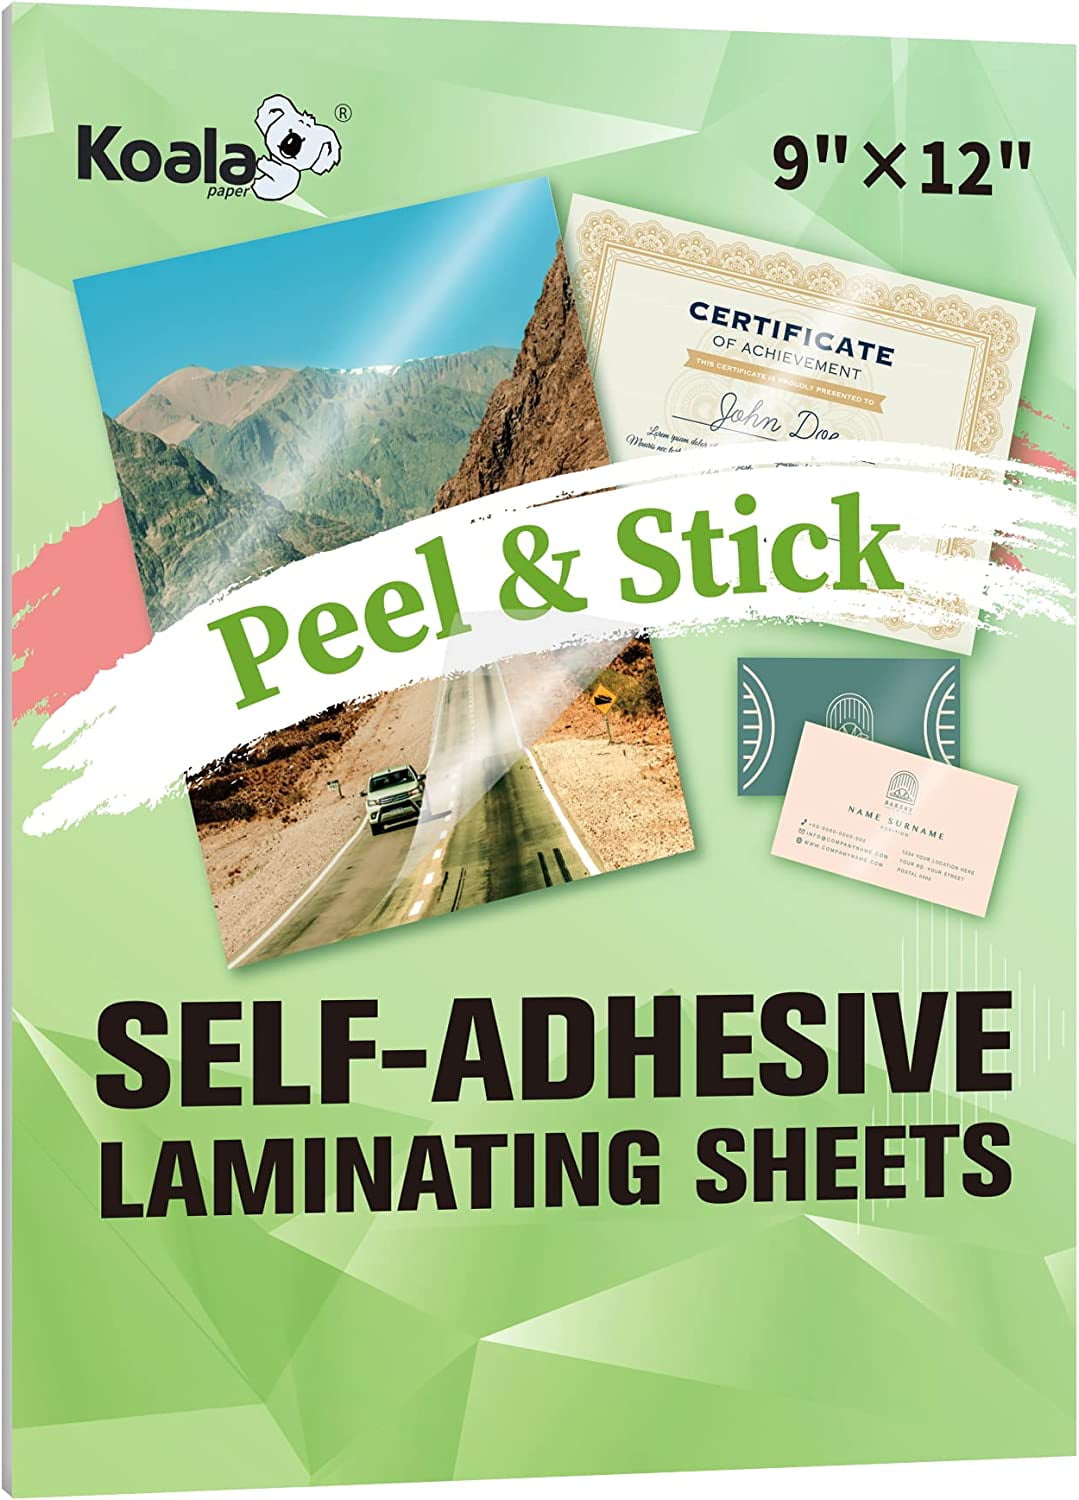 Avery Clear Laminating Sheets, 9 inch x 12 inch, Permanent Self-Adhesive, 2 Sheets (73602), Other